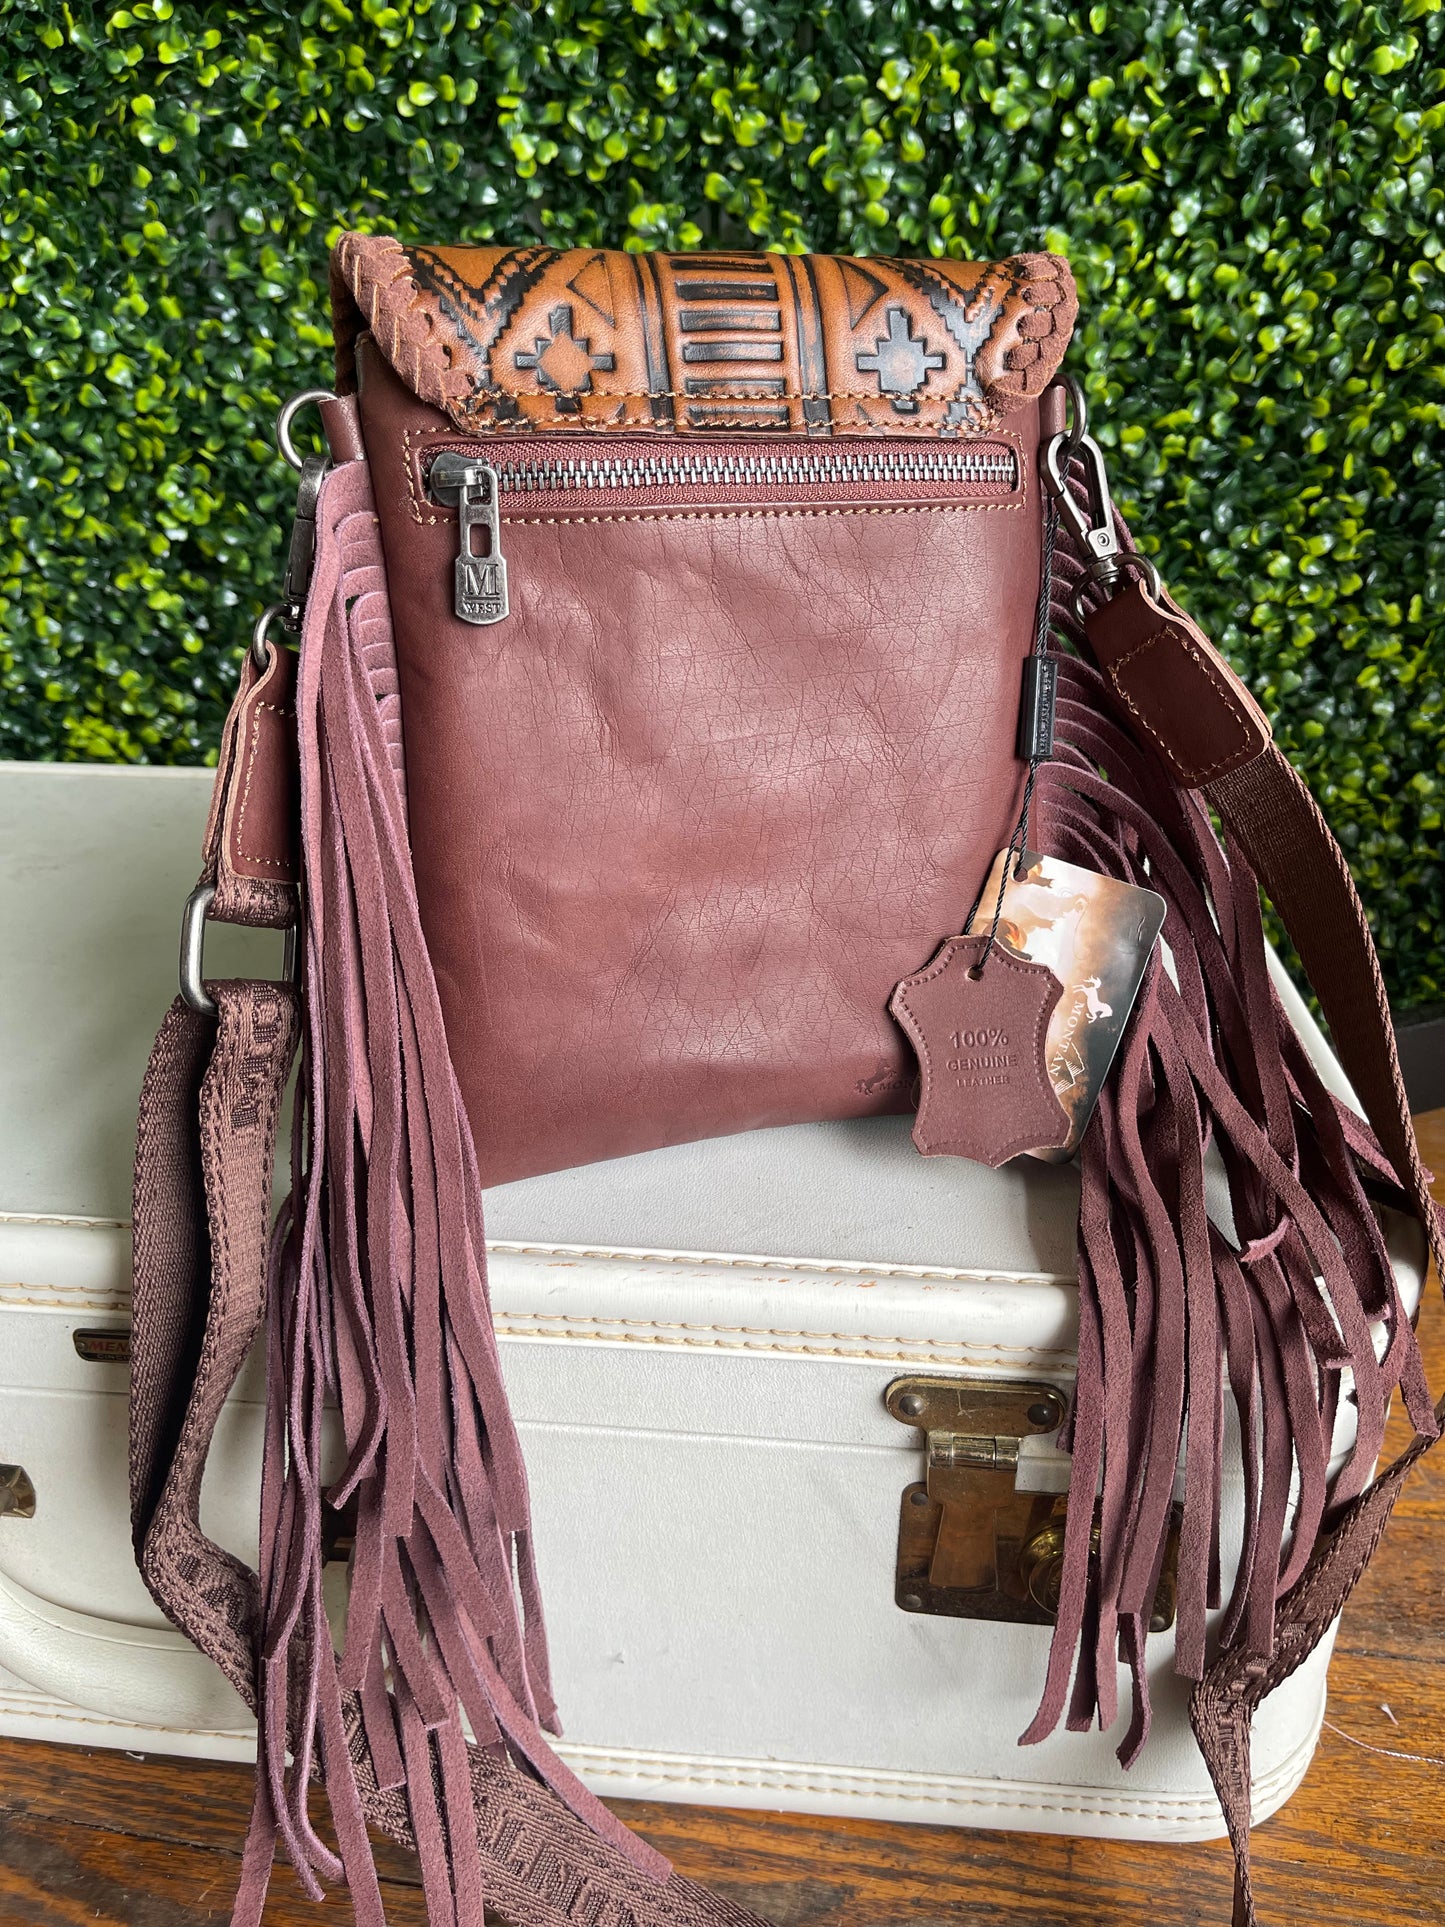 Montana West Genuine Leather Tooled Collection Crossbody - Brown Aztec